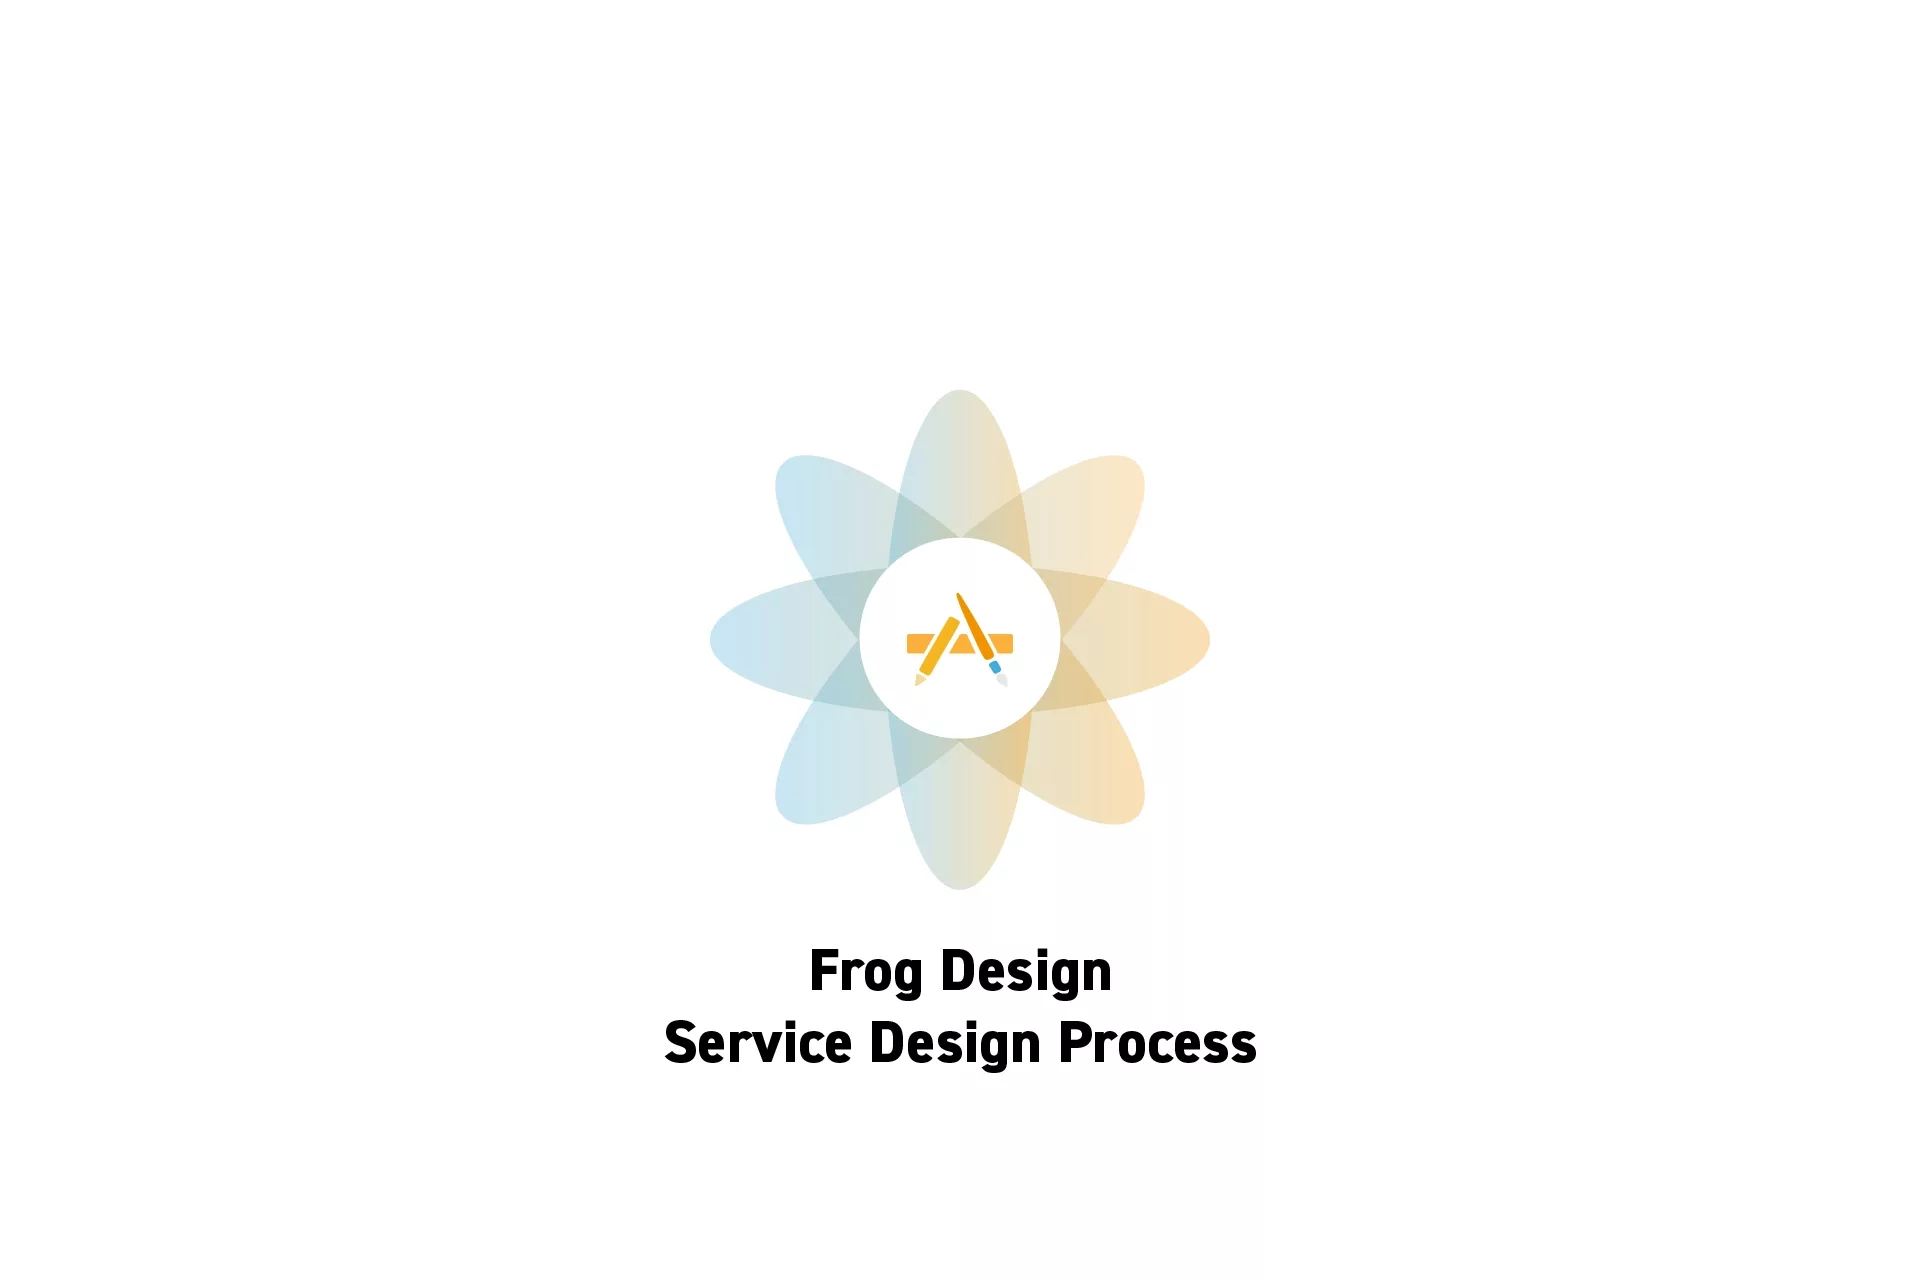 A flower that represents Digital Craft with the text “Frog Design<br />Service Design Process” beneath it.